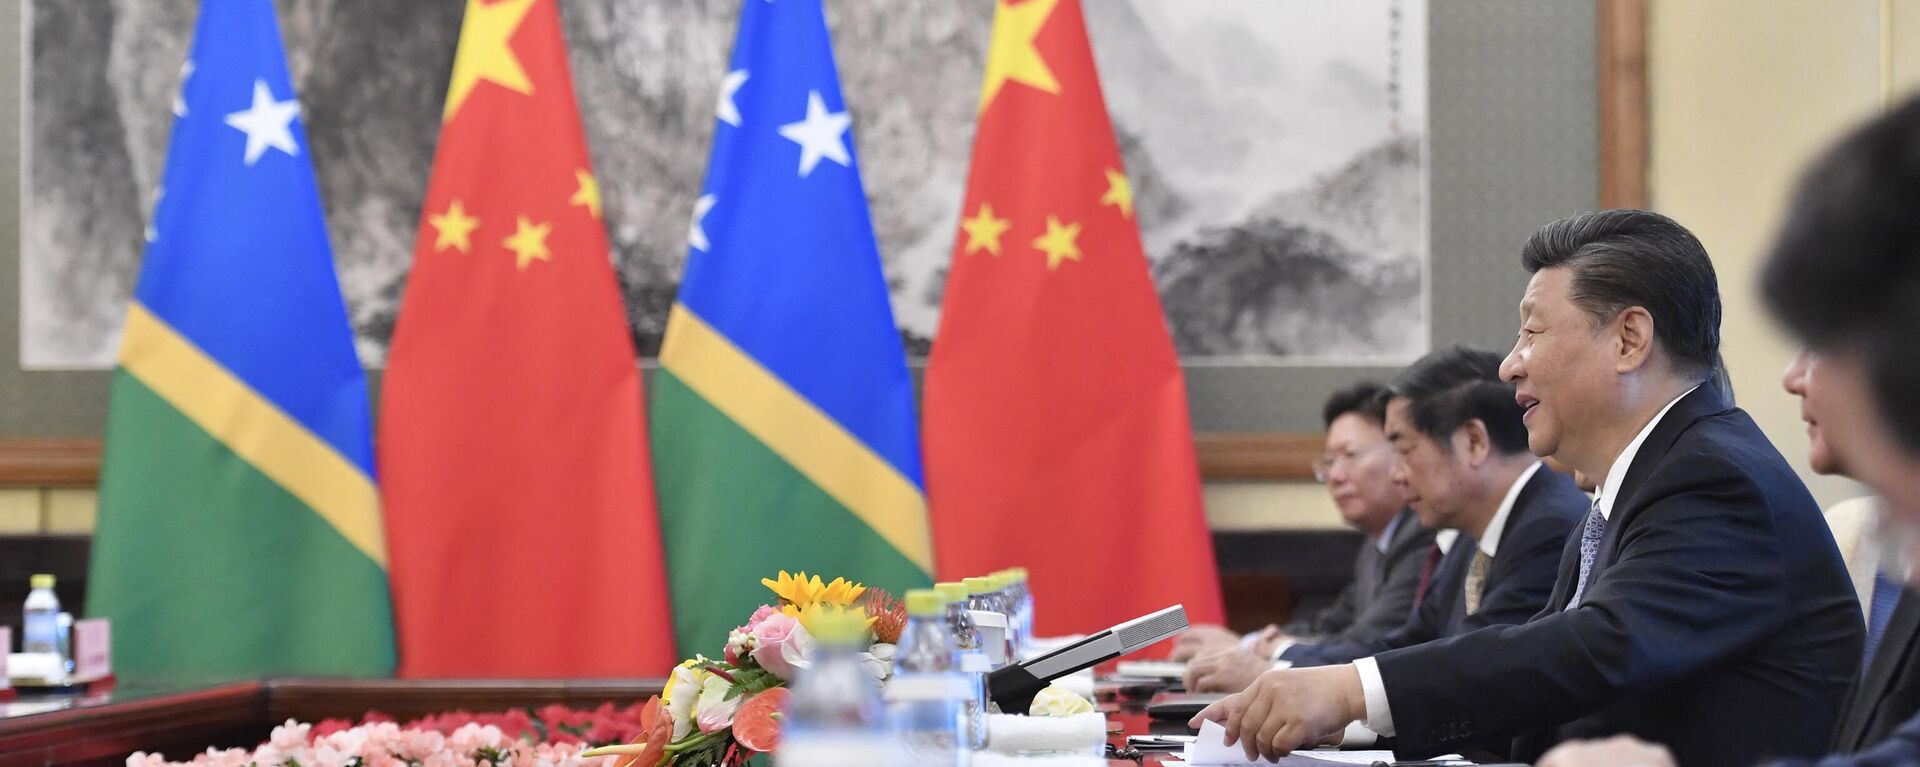 Chinese President Xi Jinping talks to Solomon Islands Prime Minister Manasseh Sogavare (not pictured) during their meeting at the Diaoyutai State Guesthouse in Beijing on October 9, 2019. (Photo by Parker Song / POOL / AFP) - Sputnik International, 1920, 25.03.2022